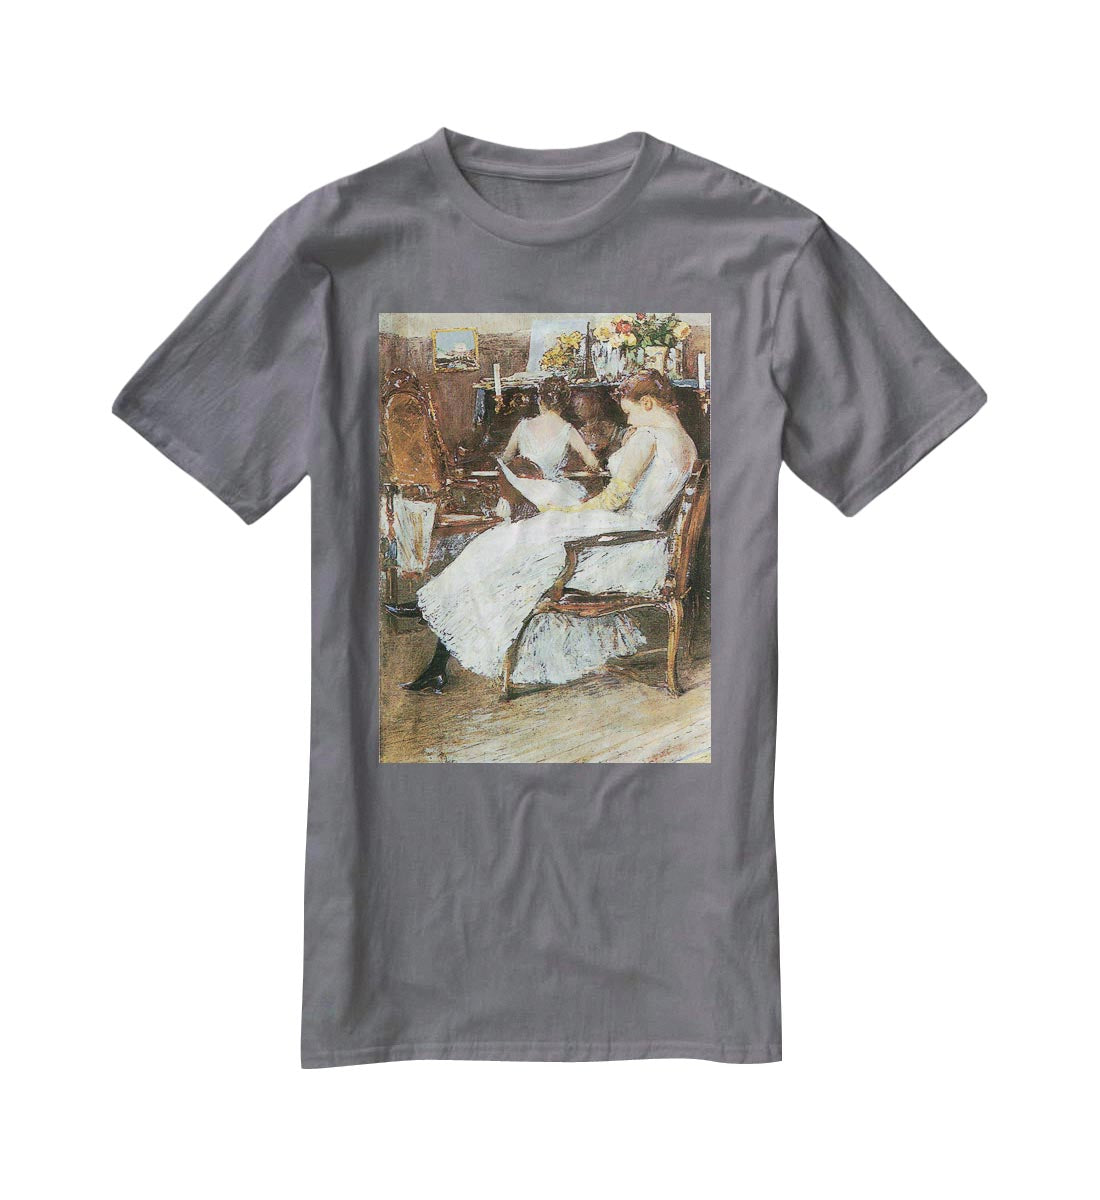 Mrs. Hassam and her sister by Hassam T-Shirt - Canvas Art Rocks - 3